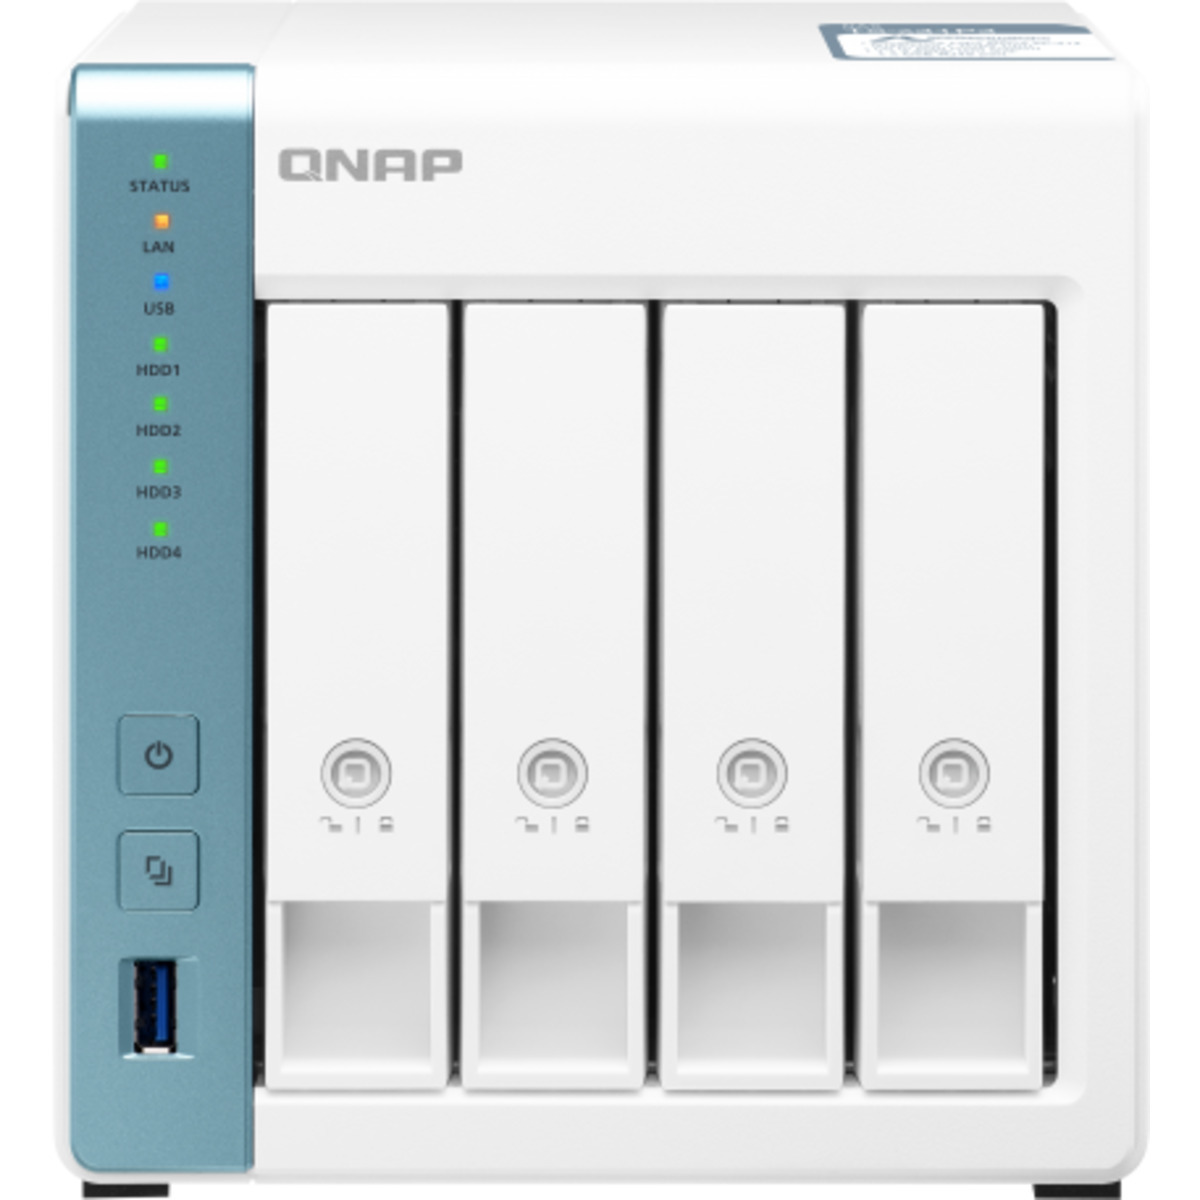 buy $1563 QNAP TS-431P3 24tb Desktop NAS - Network Attached Storage Device 4x6000gb Seagate IronWolf Pro ST6000NT001 3.5 7200rpm SATA 6Gb/s HDD NAS Class Drives Installed - Burn-In Tested - FREE RAM UPGRADE - nas headquarters buy network attached storage server device das new raid-5 free shipping simply usa TS-431P3